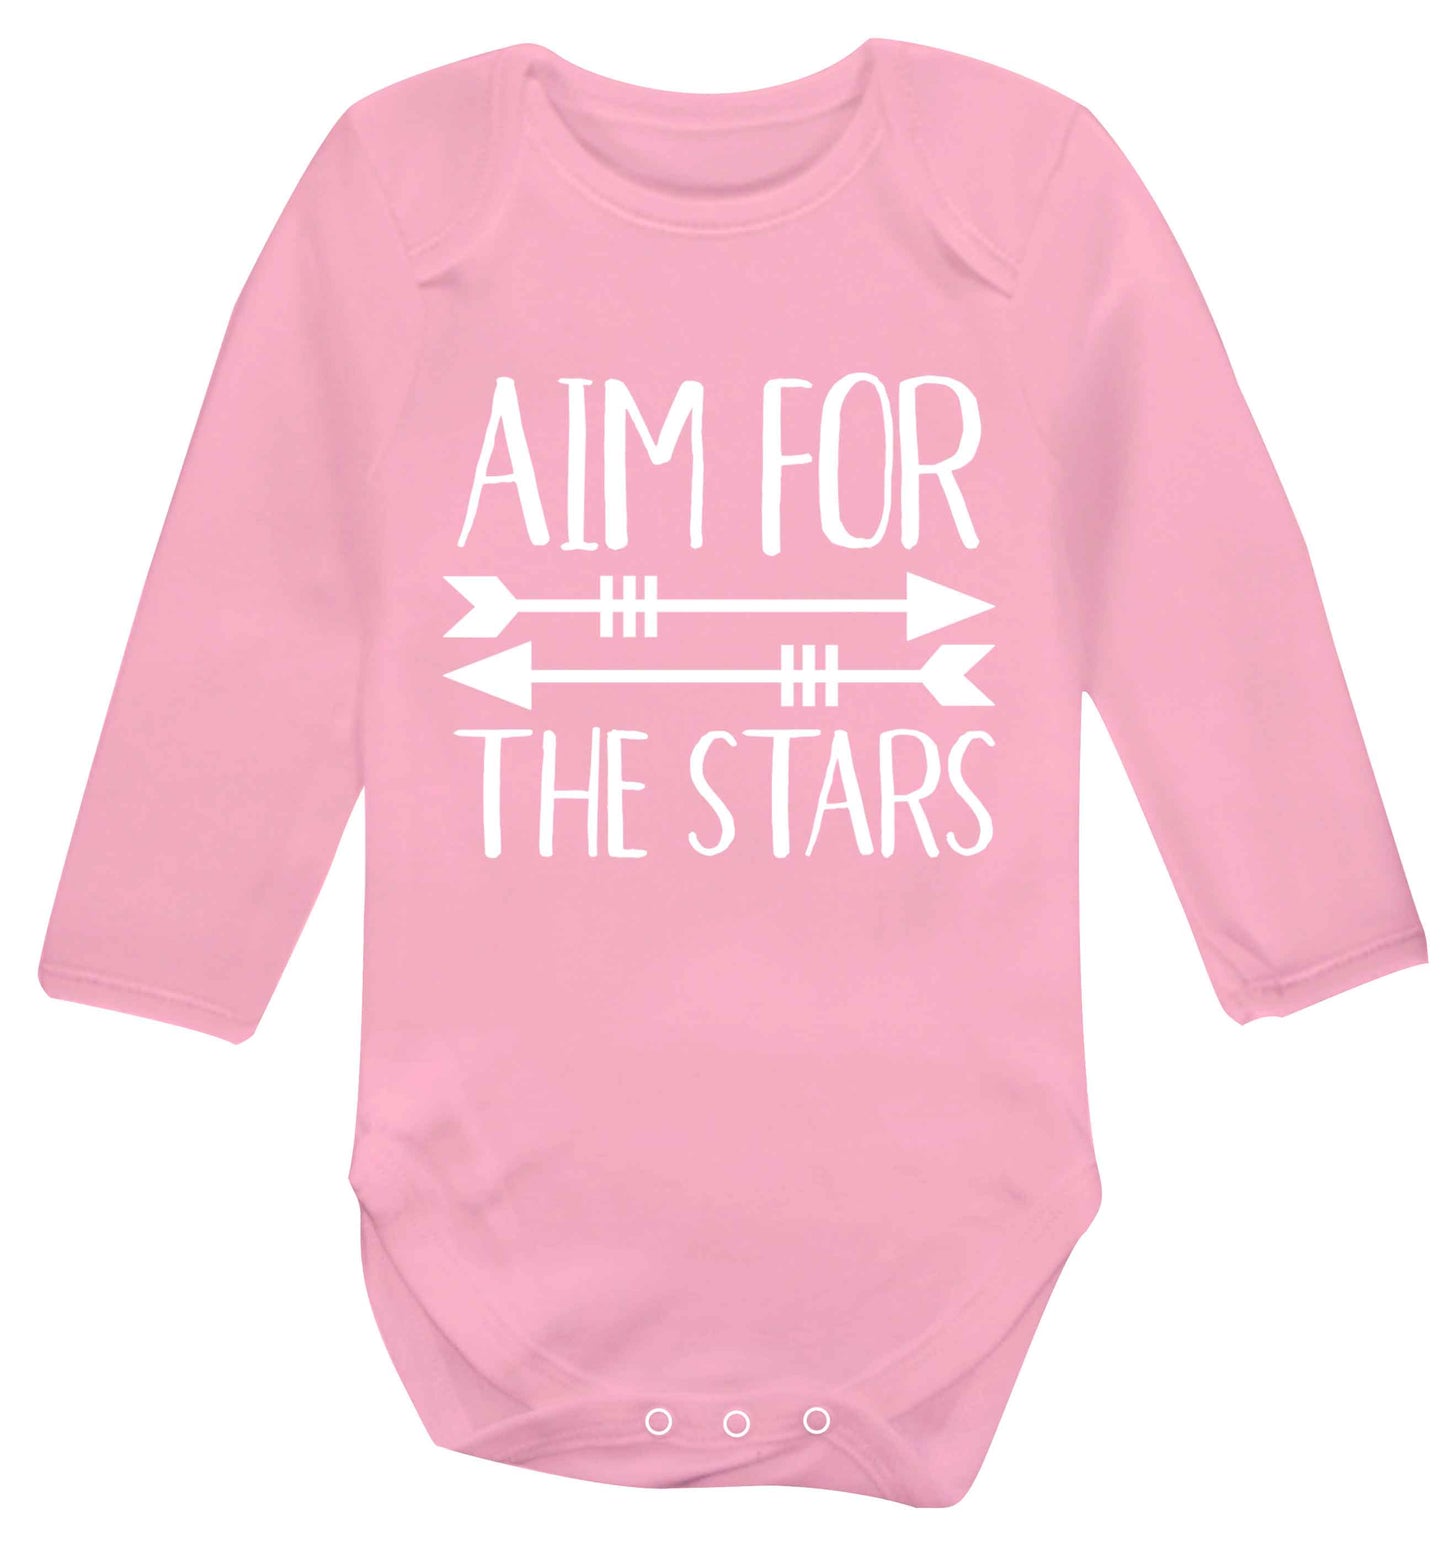 Aim for the stars Baby Vest long sleeved pale pink 6-12 months